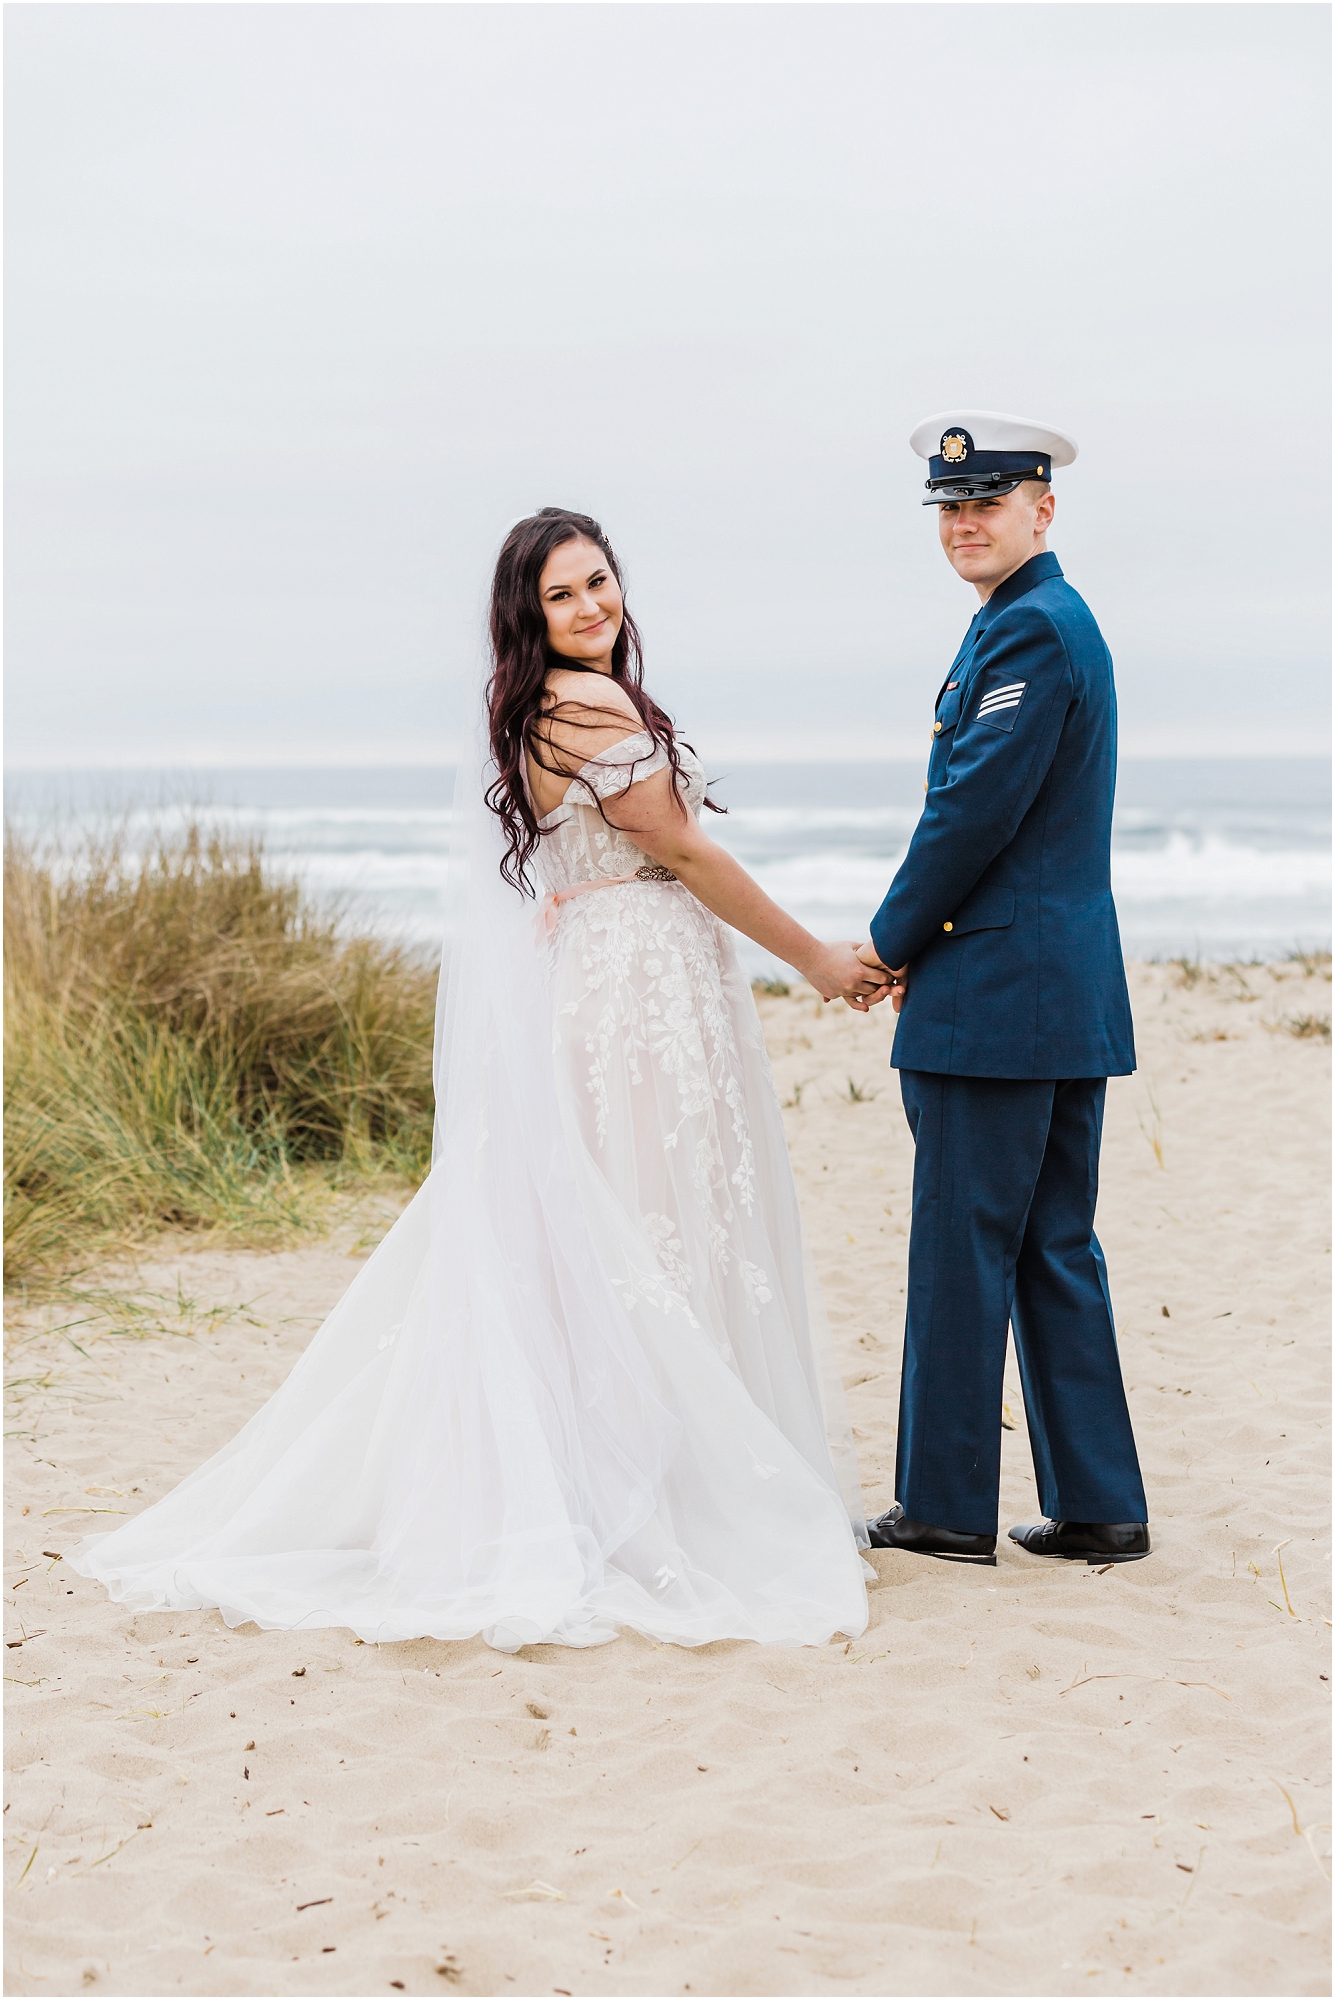 A groom, wearing his navy US Coast Guard uniform, and a bride wearing a blush pink off the shoulder gown, with a long white veil, pose together on the sandy beach along the ocean for this Oregon Coast Guard Elopement in Winchester Bay. | Erica Swantek Photography